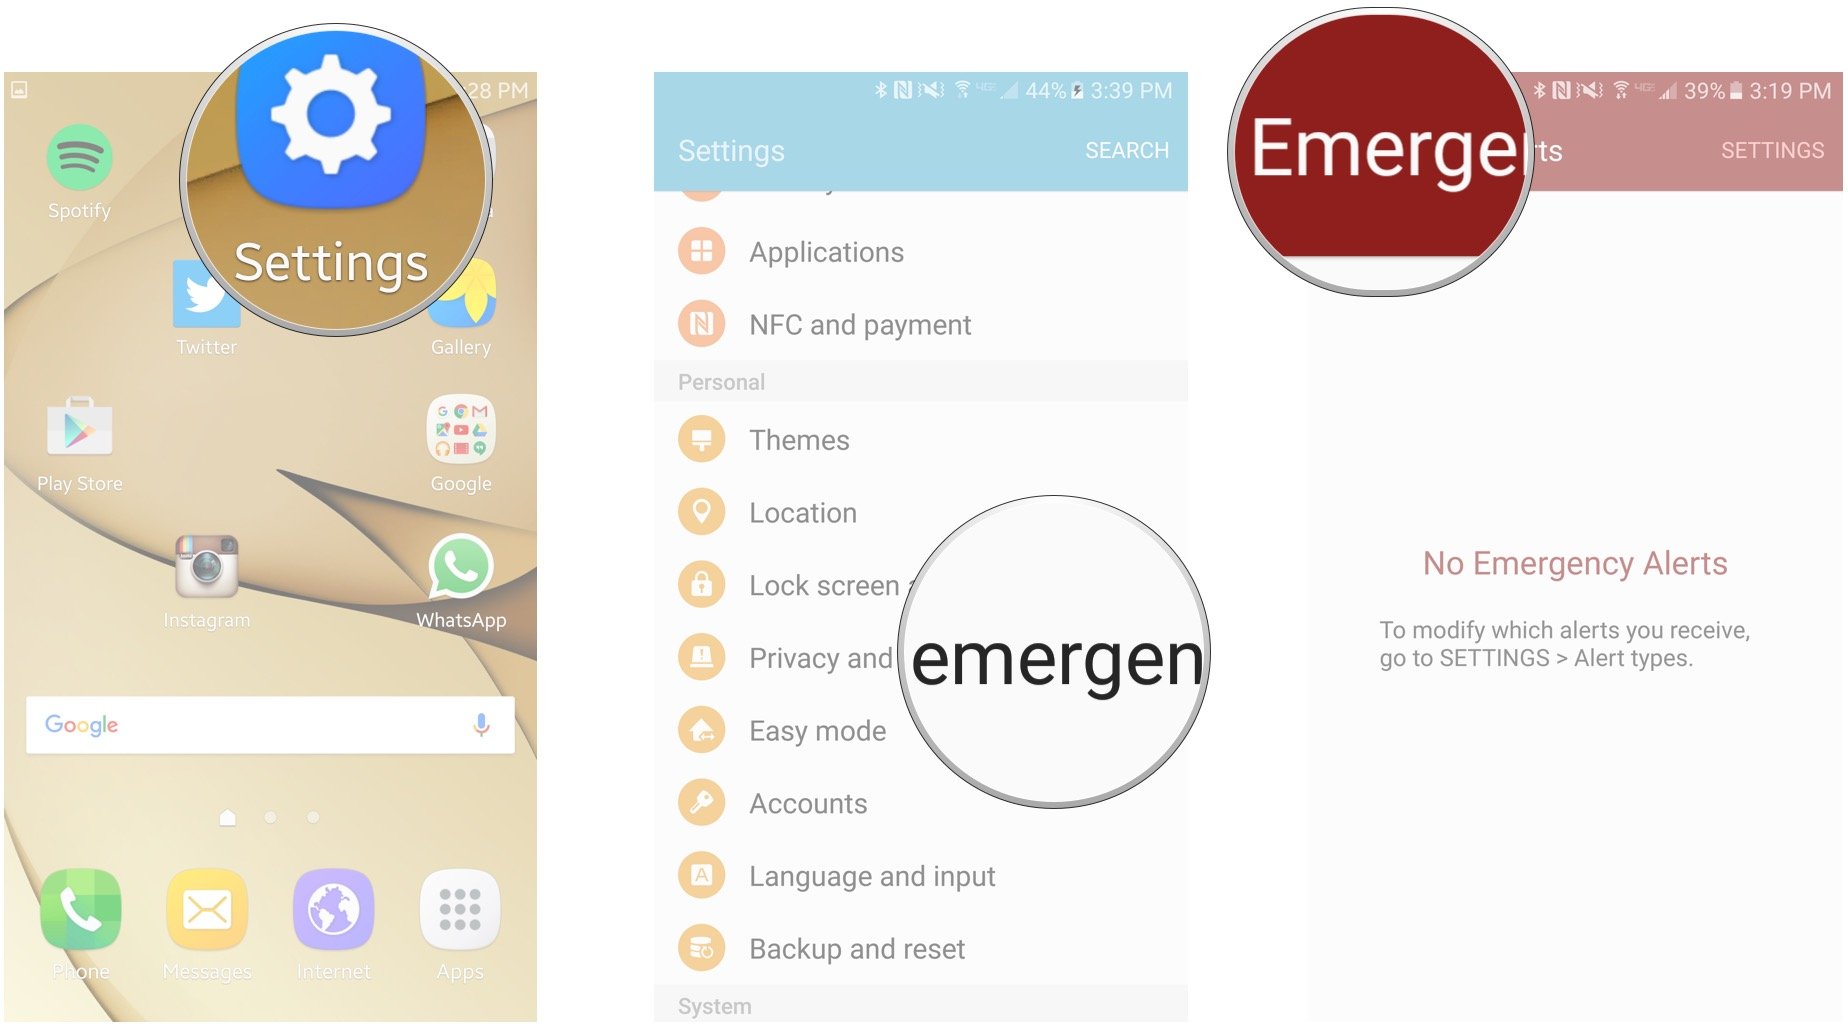 Launch Settings, tap Privacy and emergency, tap Emergency alerts